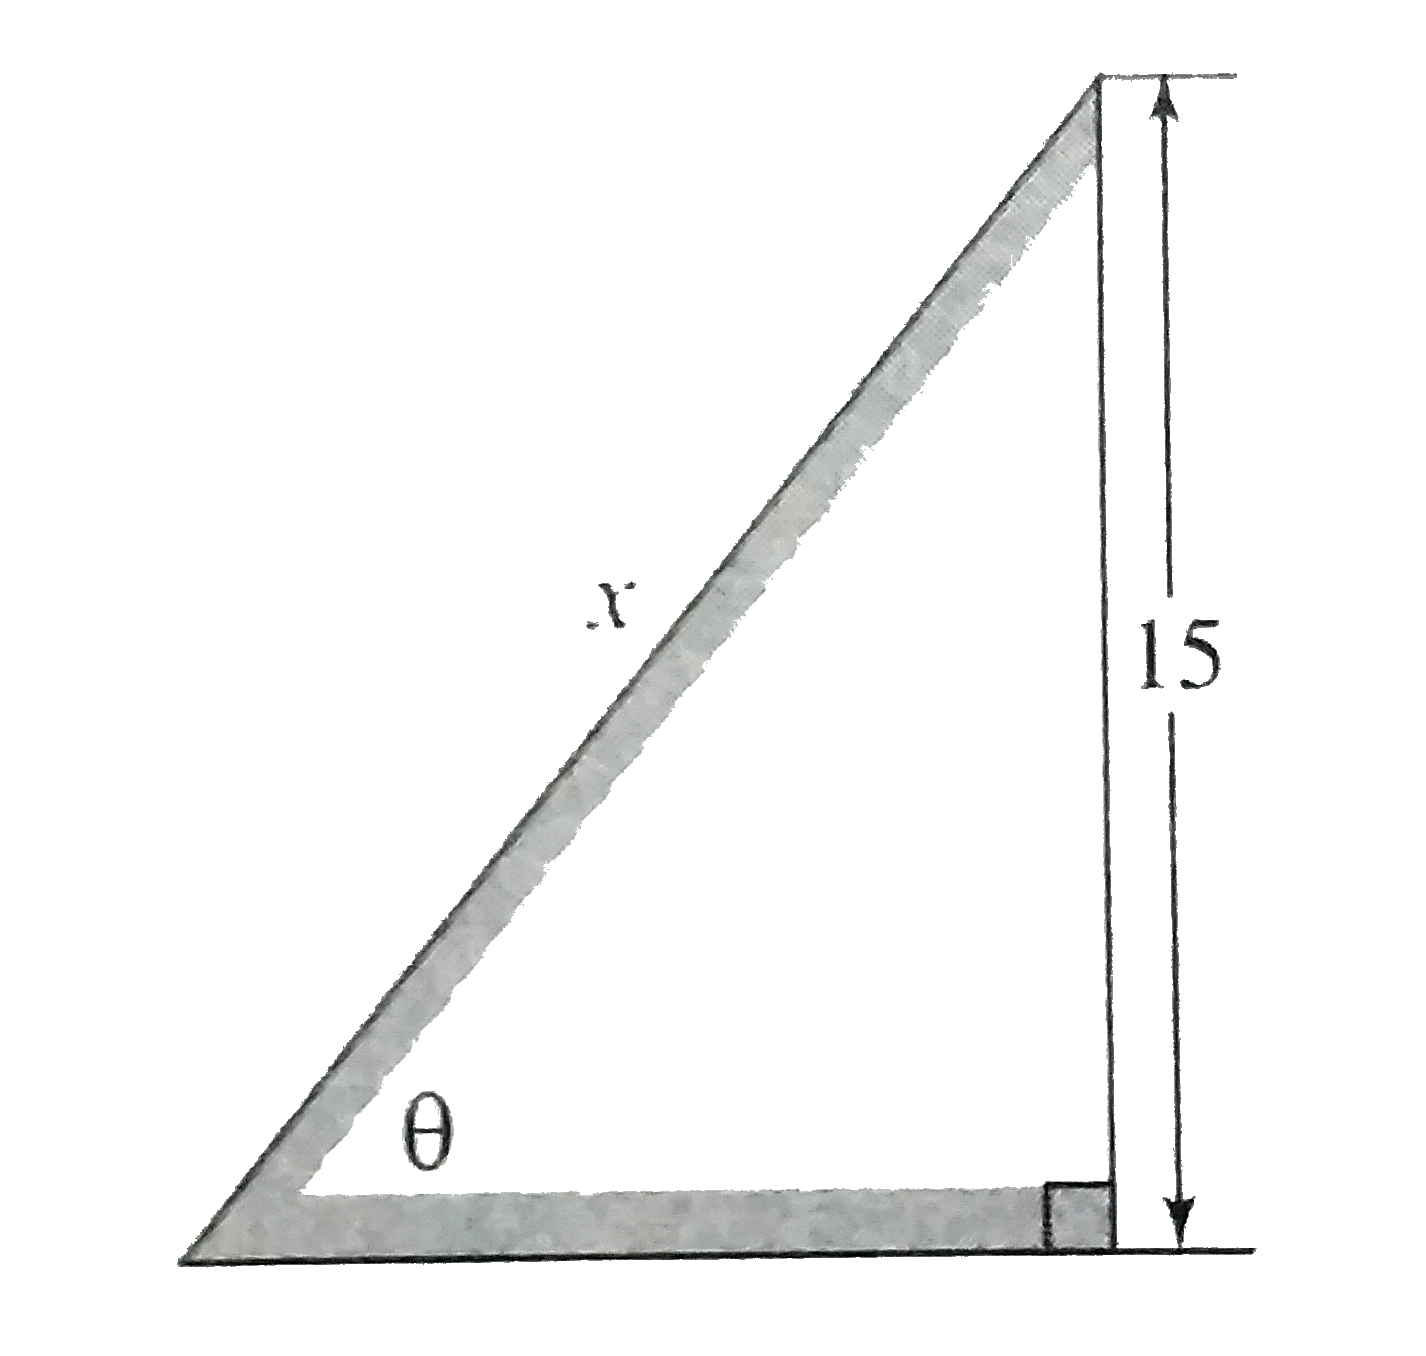 A painter  needs  to reach  the top  of a tail  sign  in the  middle  of a  flat  and level  field  .He  uses  a ladder  of length  x to  reach  a point  on the  sign  15  feet   above  the ground  . The  angle  formed  where  the ladder  meets the ground  is noted  in the  figure  below  as  theta  , which  of the  following  relation  - ships  must  be true ?